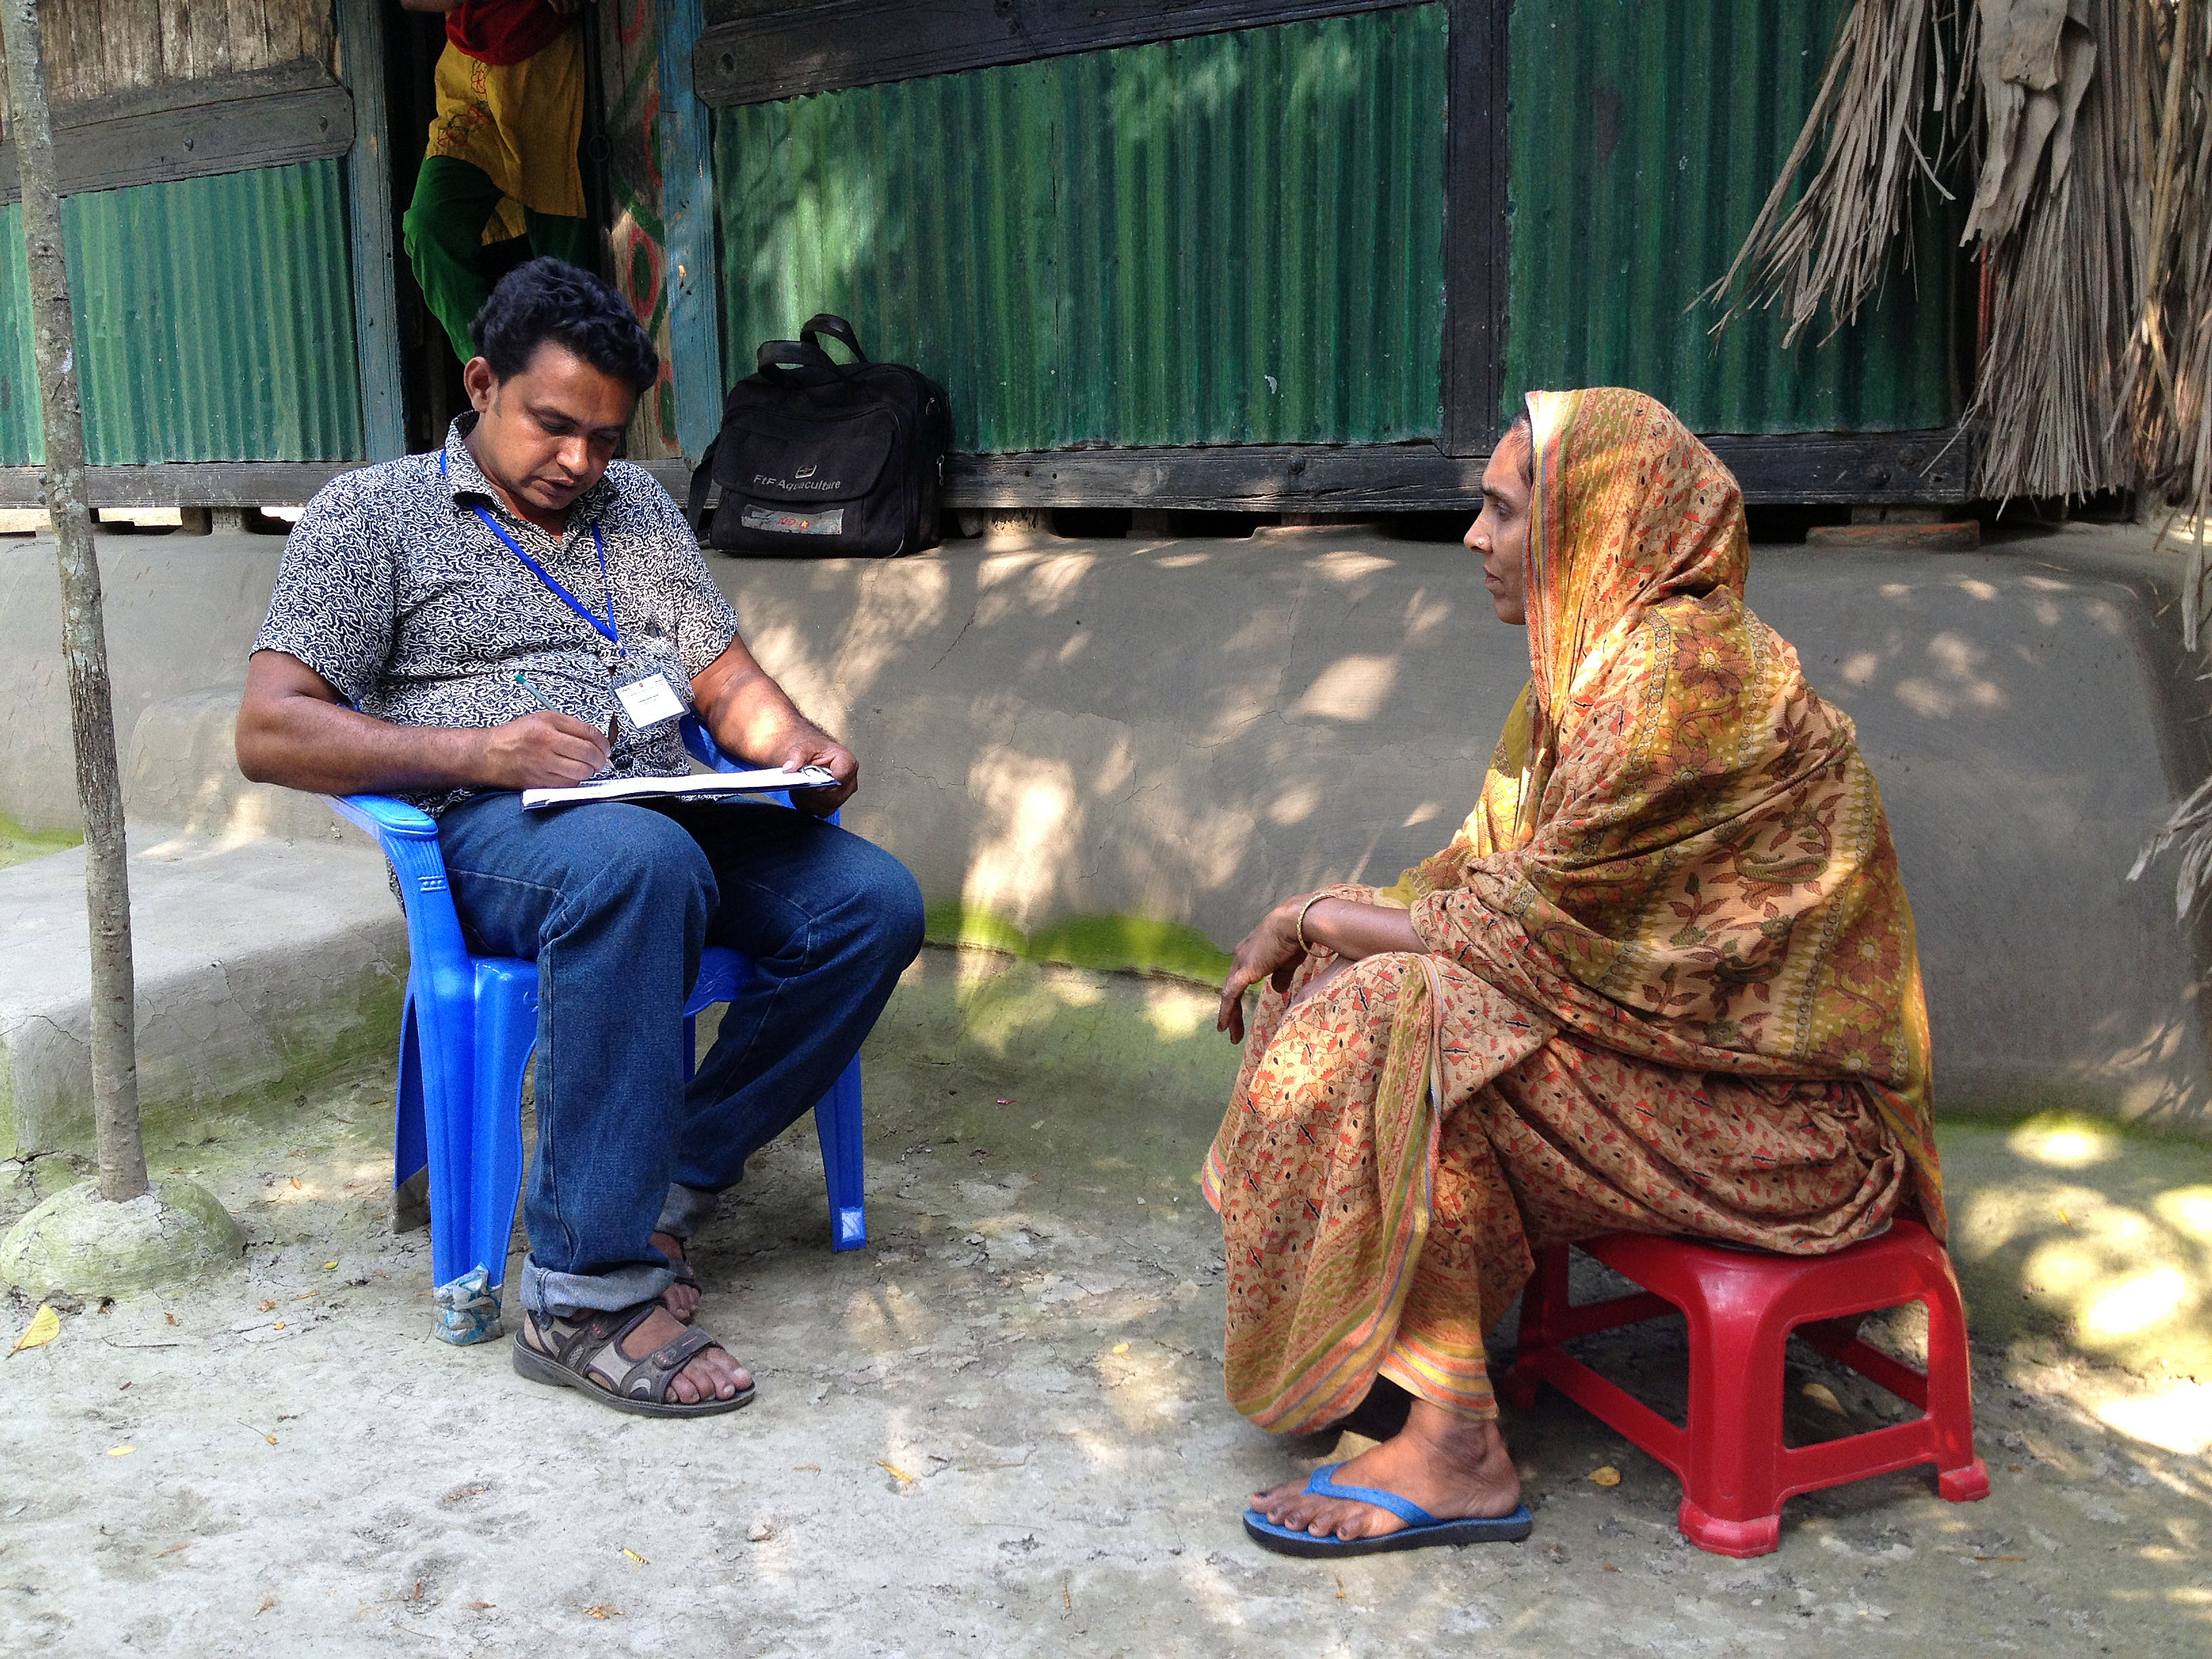 Observation of Annual Impact Survey data collection for one project in Bangladesh.  This survey is carried out by the project’s own outreach staff.  The survey questionnaire collects all kinds of agricultural indicators and some consumption information, and lasts about two hours.